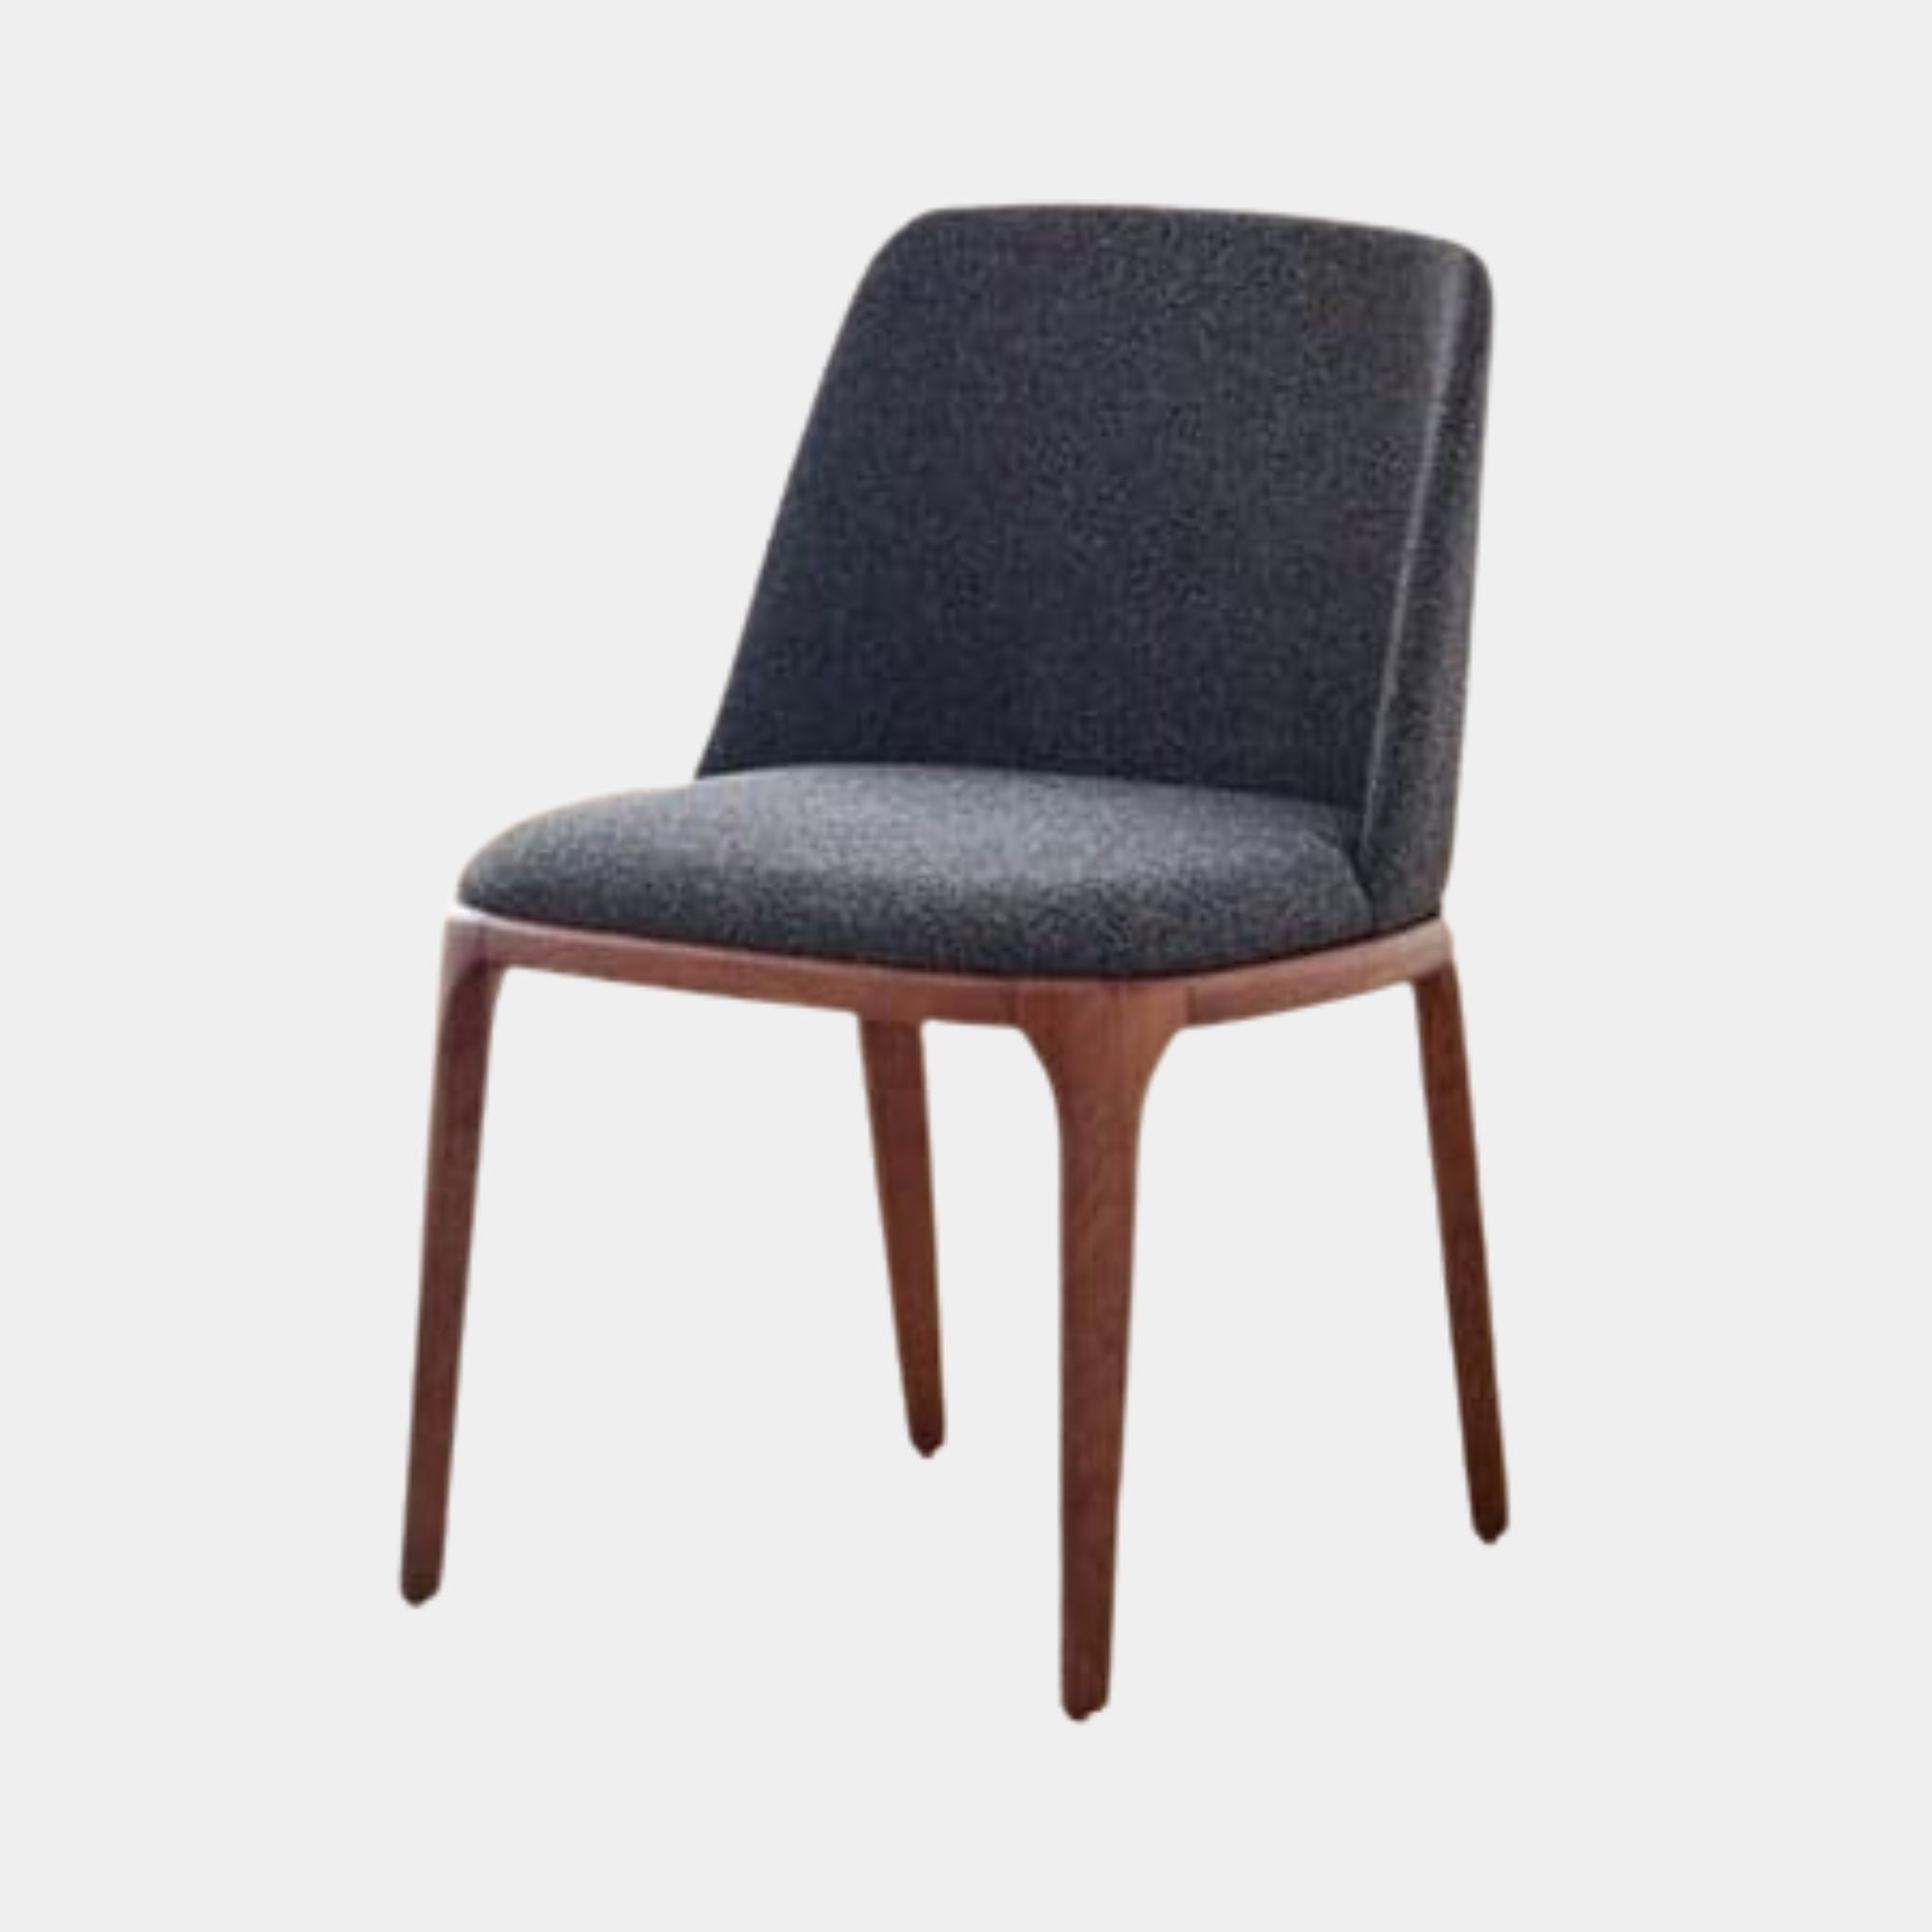 Designer Furniture | Grace Dining Chair - The Feelter